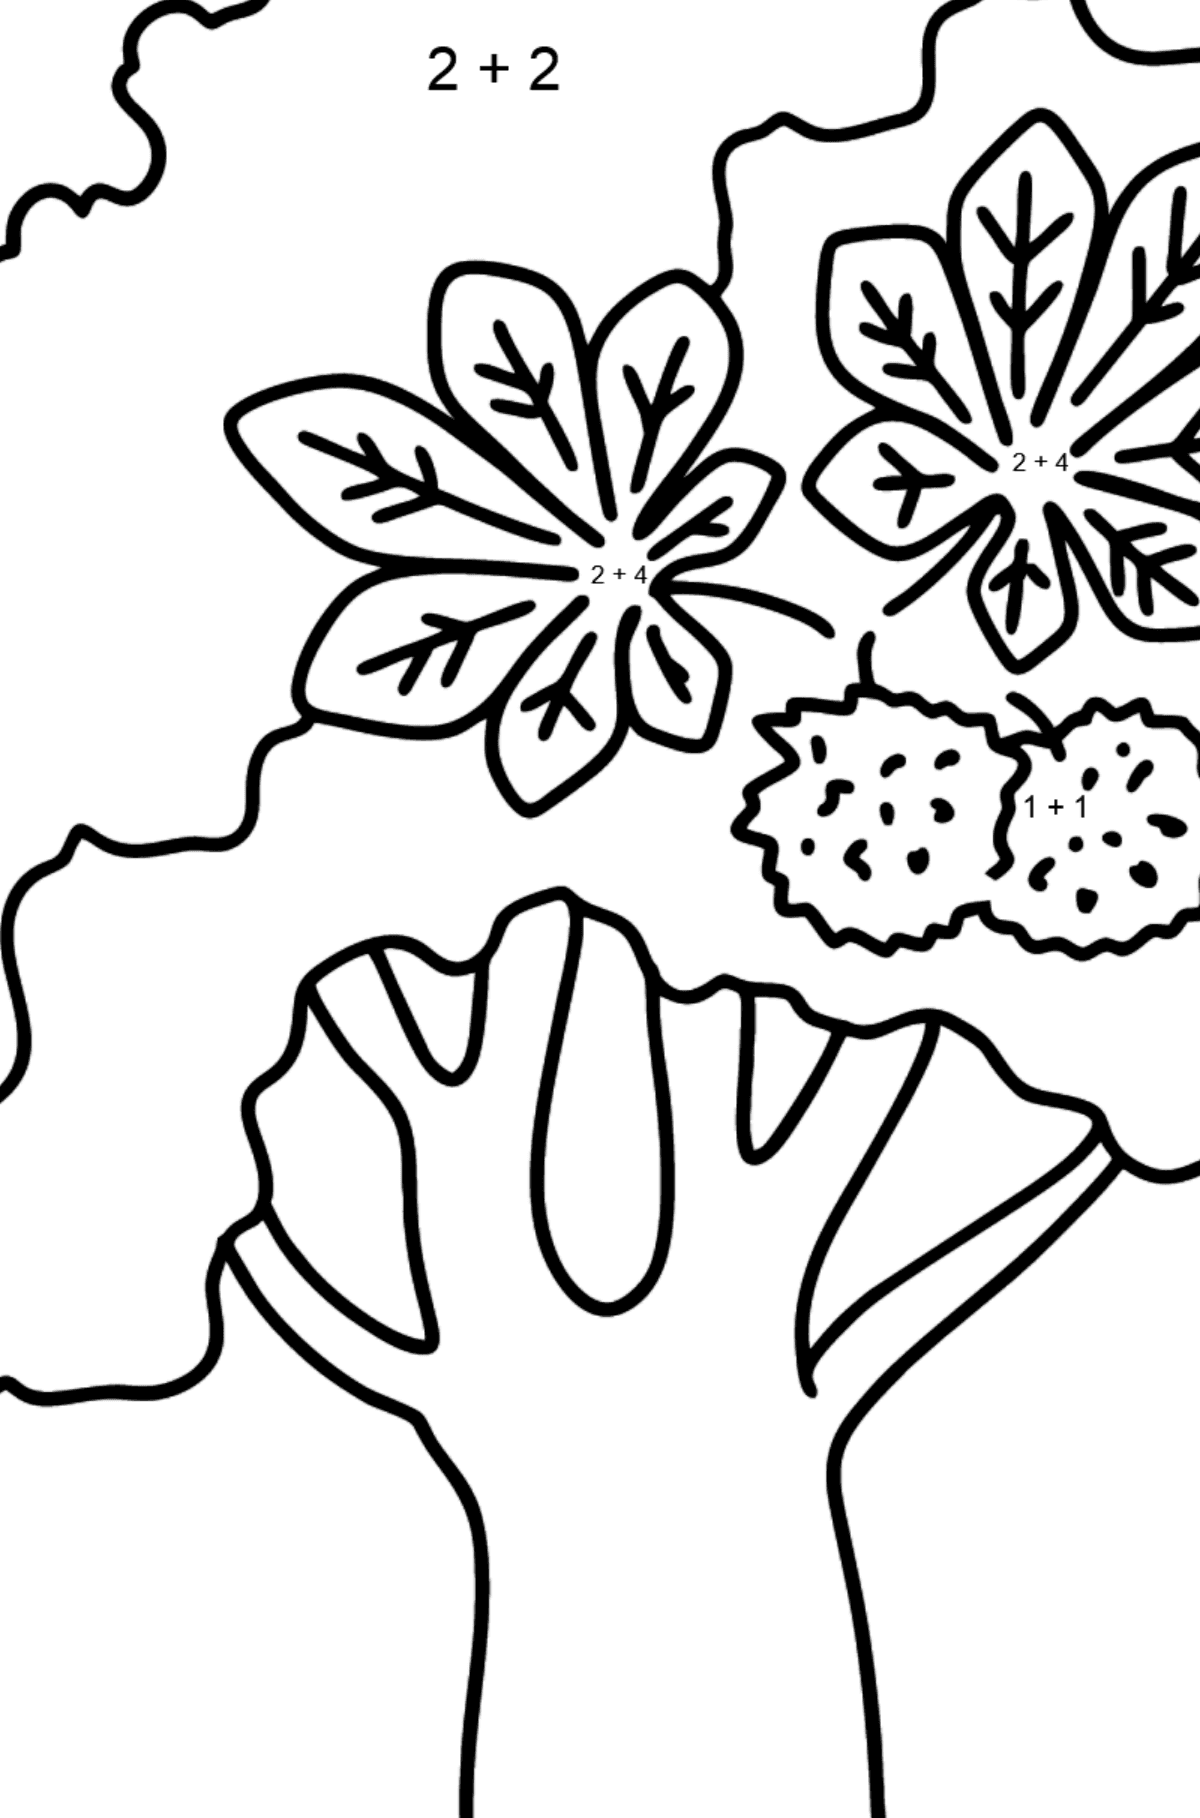 Chestnut coloring page - Math Coloring - Addition for Kids